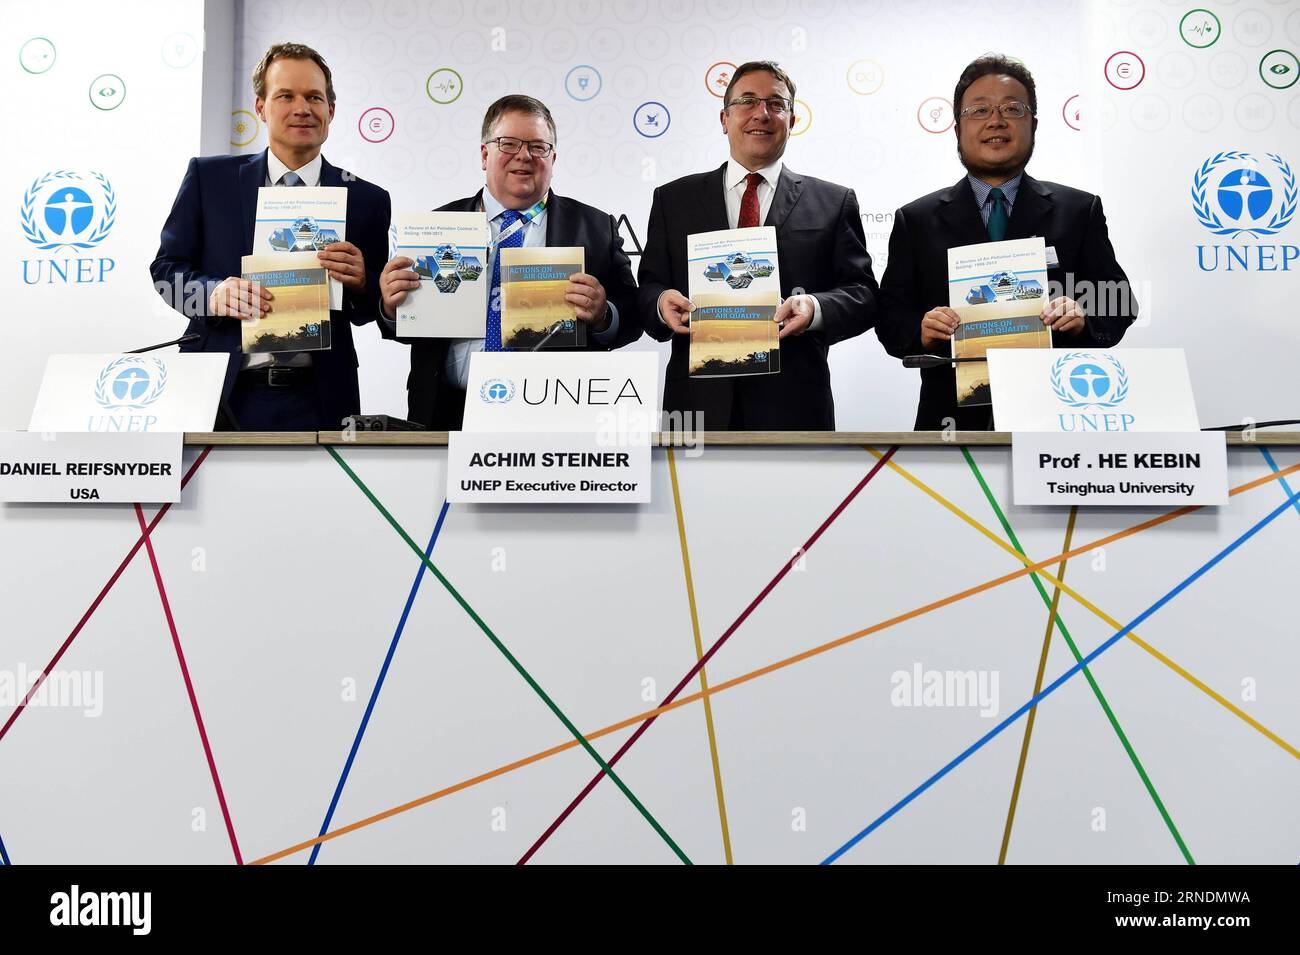 (160524)-- NAIROBI, May 24, 2016 -- UNEP Executive Director Achim Steiner (2nd R), He Kebin (1st R), Dean at the School of Environment at the Tsingua University in China, together with other representatives release two air quality control reports during a press conference of the ongoing second edition of the United Nations Environment Assembly in Nairobi, Kenya, May 24, 2016. The United Nations Environmental Program (UNEP) has said there is need for governments to refashion policy interventions aimed at reducing air pollution. ) KENYA-NAIROBI-UNITED NATIONS ENVIRONMENT ASSEMBLY-AIR POLLUTION C Stock Photo